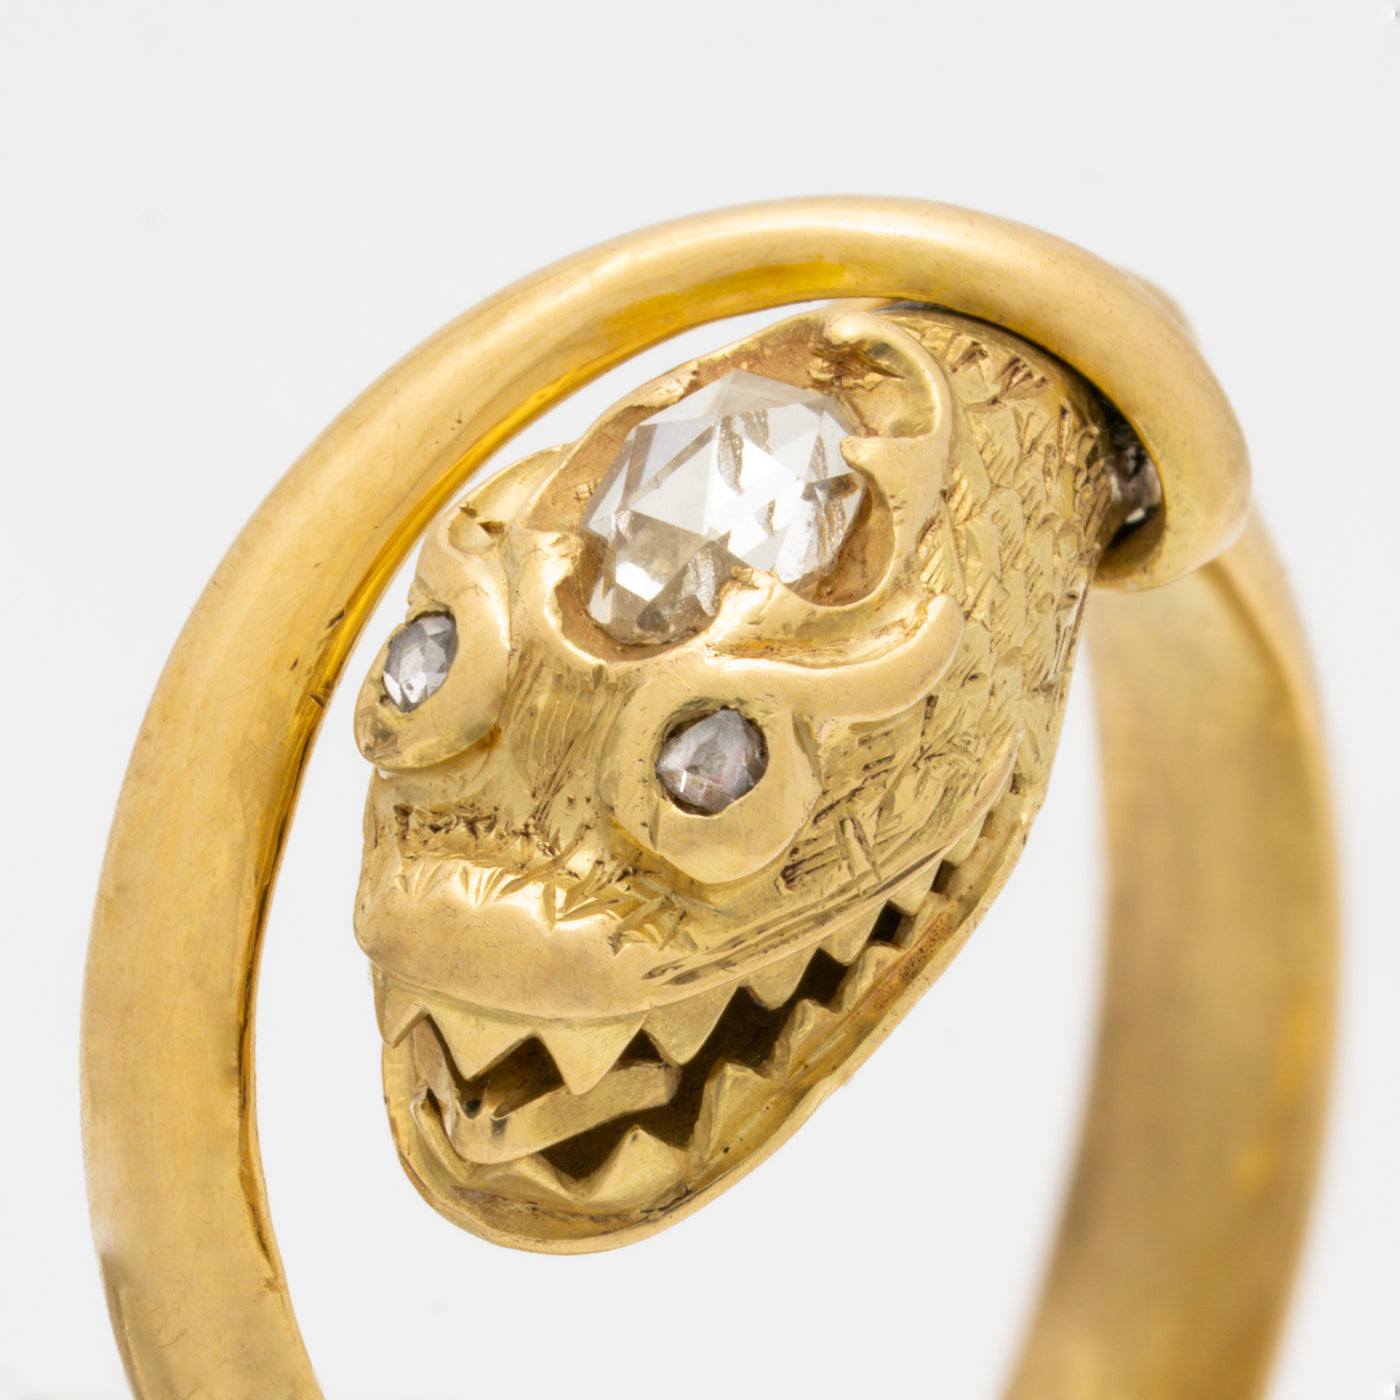 VICTORIAN 18K YELLOW GOLD AND 0.60CTS ROSE CUT DIAMOND RING c.1850s